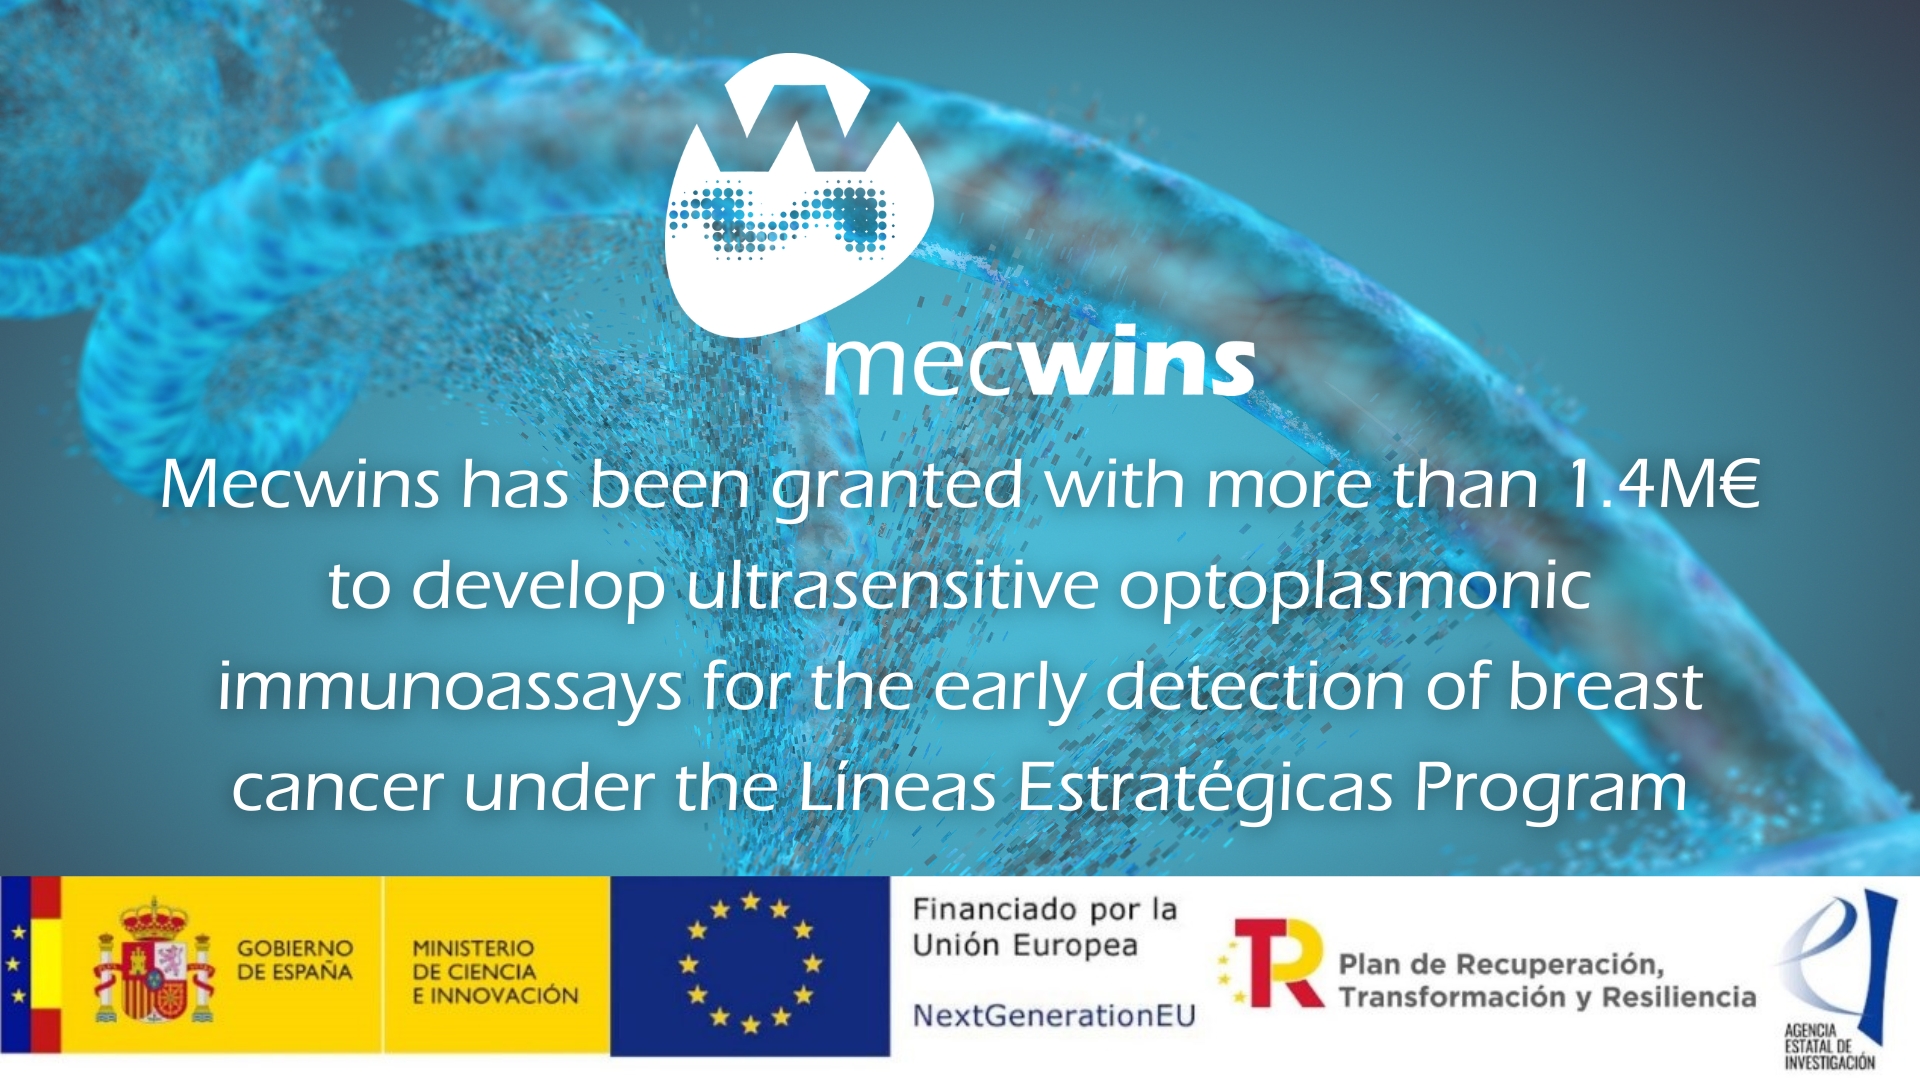 Mecwins has been granted with more than 1.4M€ to develop ultrasensitive optoplasmonic immunoassays for the early detection of breast cancer under the Líneas Estratégicas Program